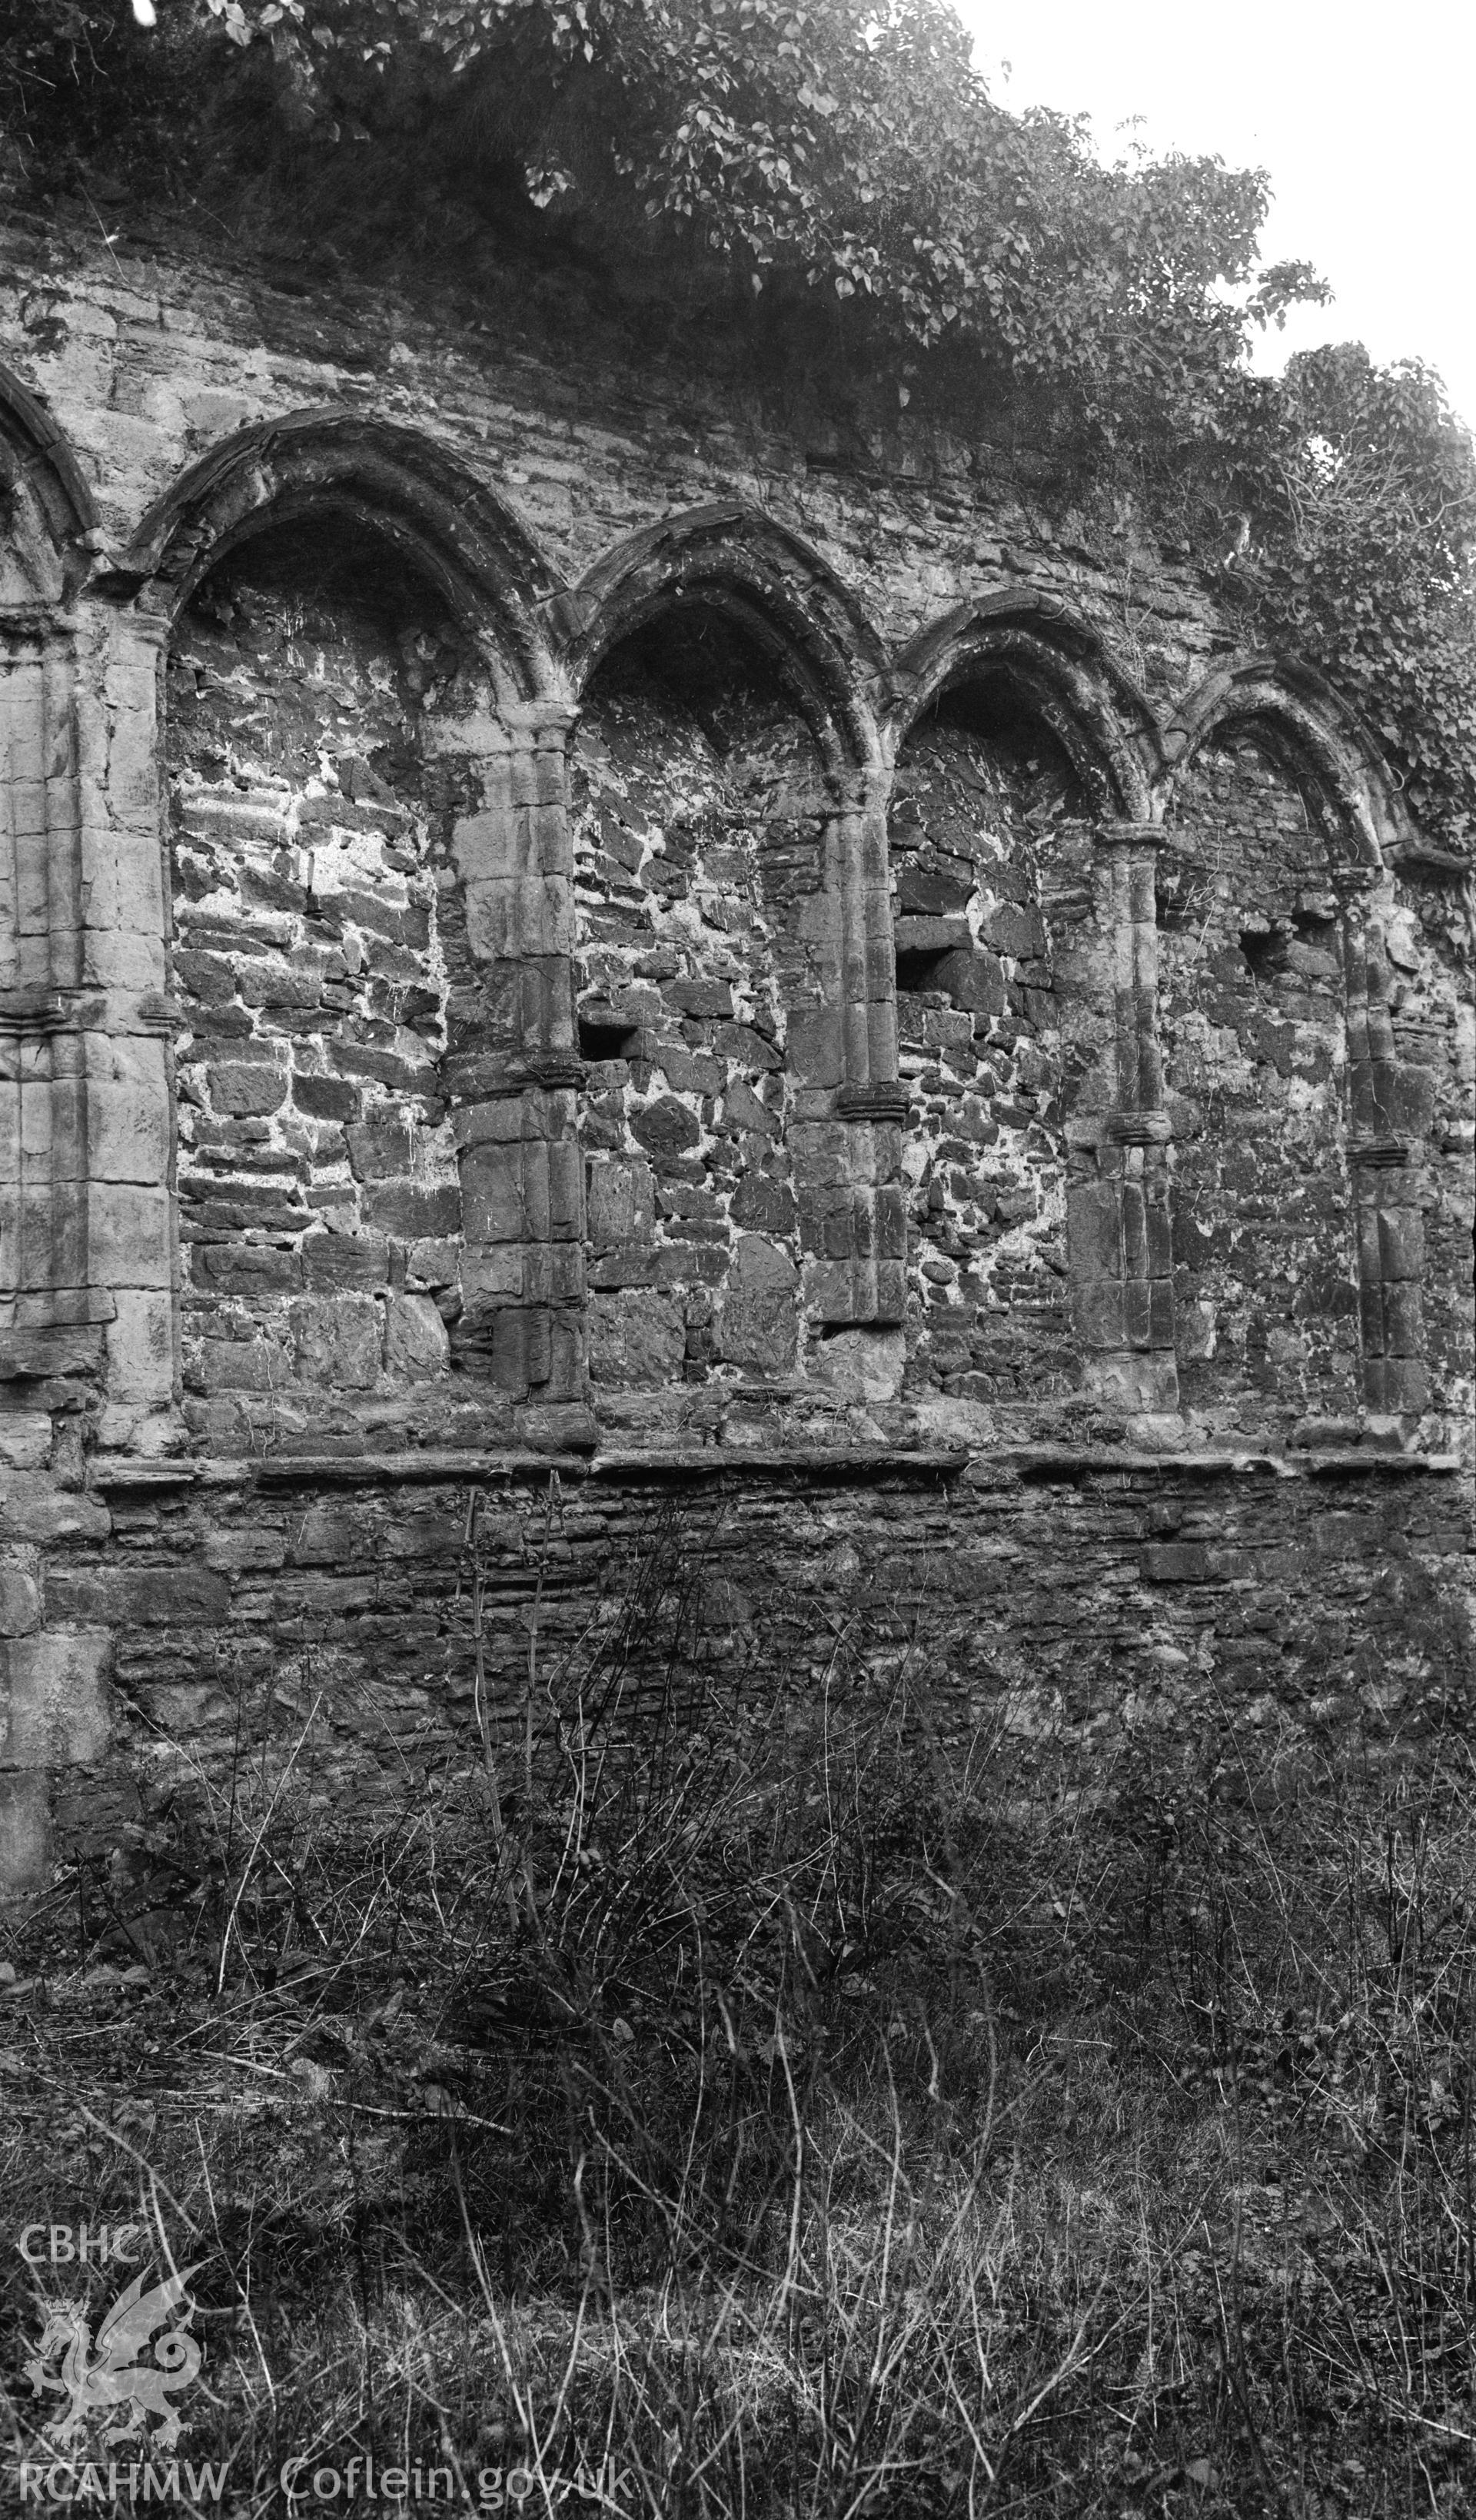 View of Basingwerk Abbey showing detail of arched openings.